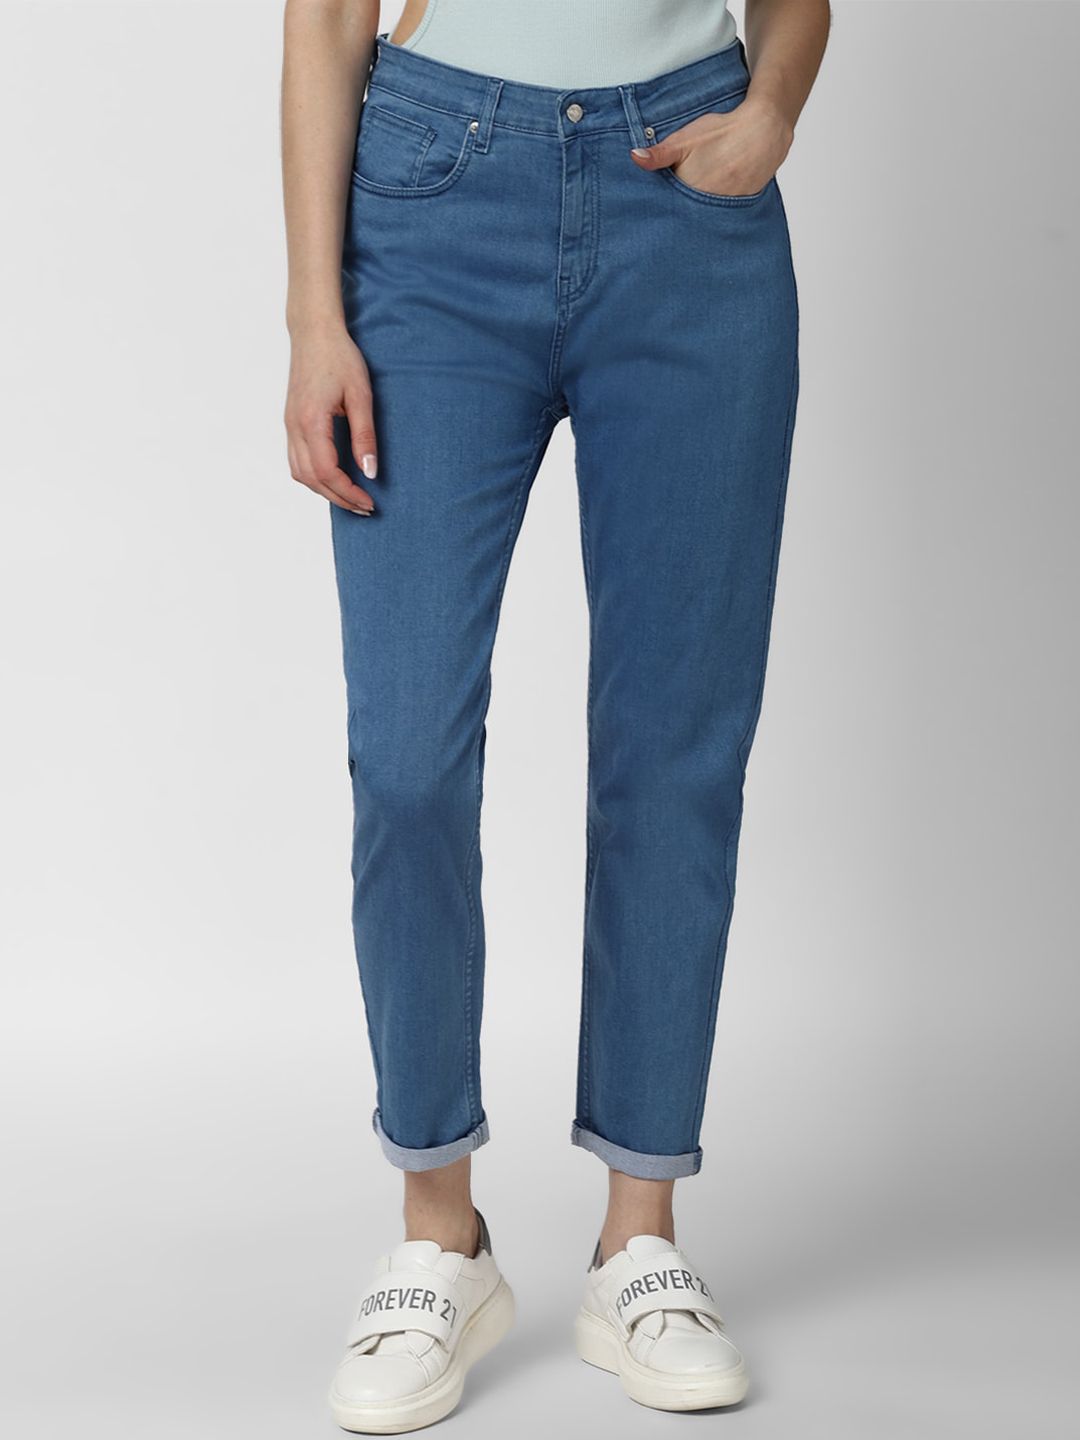 FOREVER 21 Women Blue Mid Rise Regular Fit Jeans Price in India